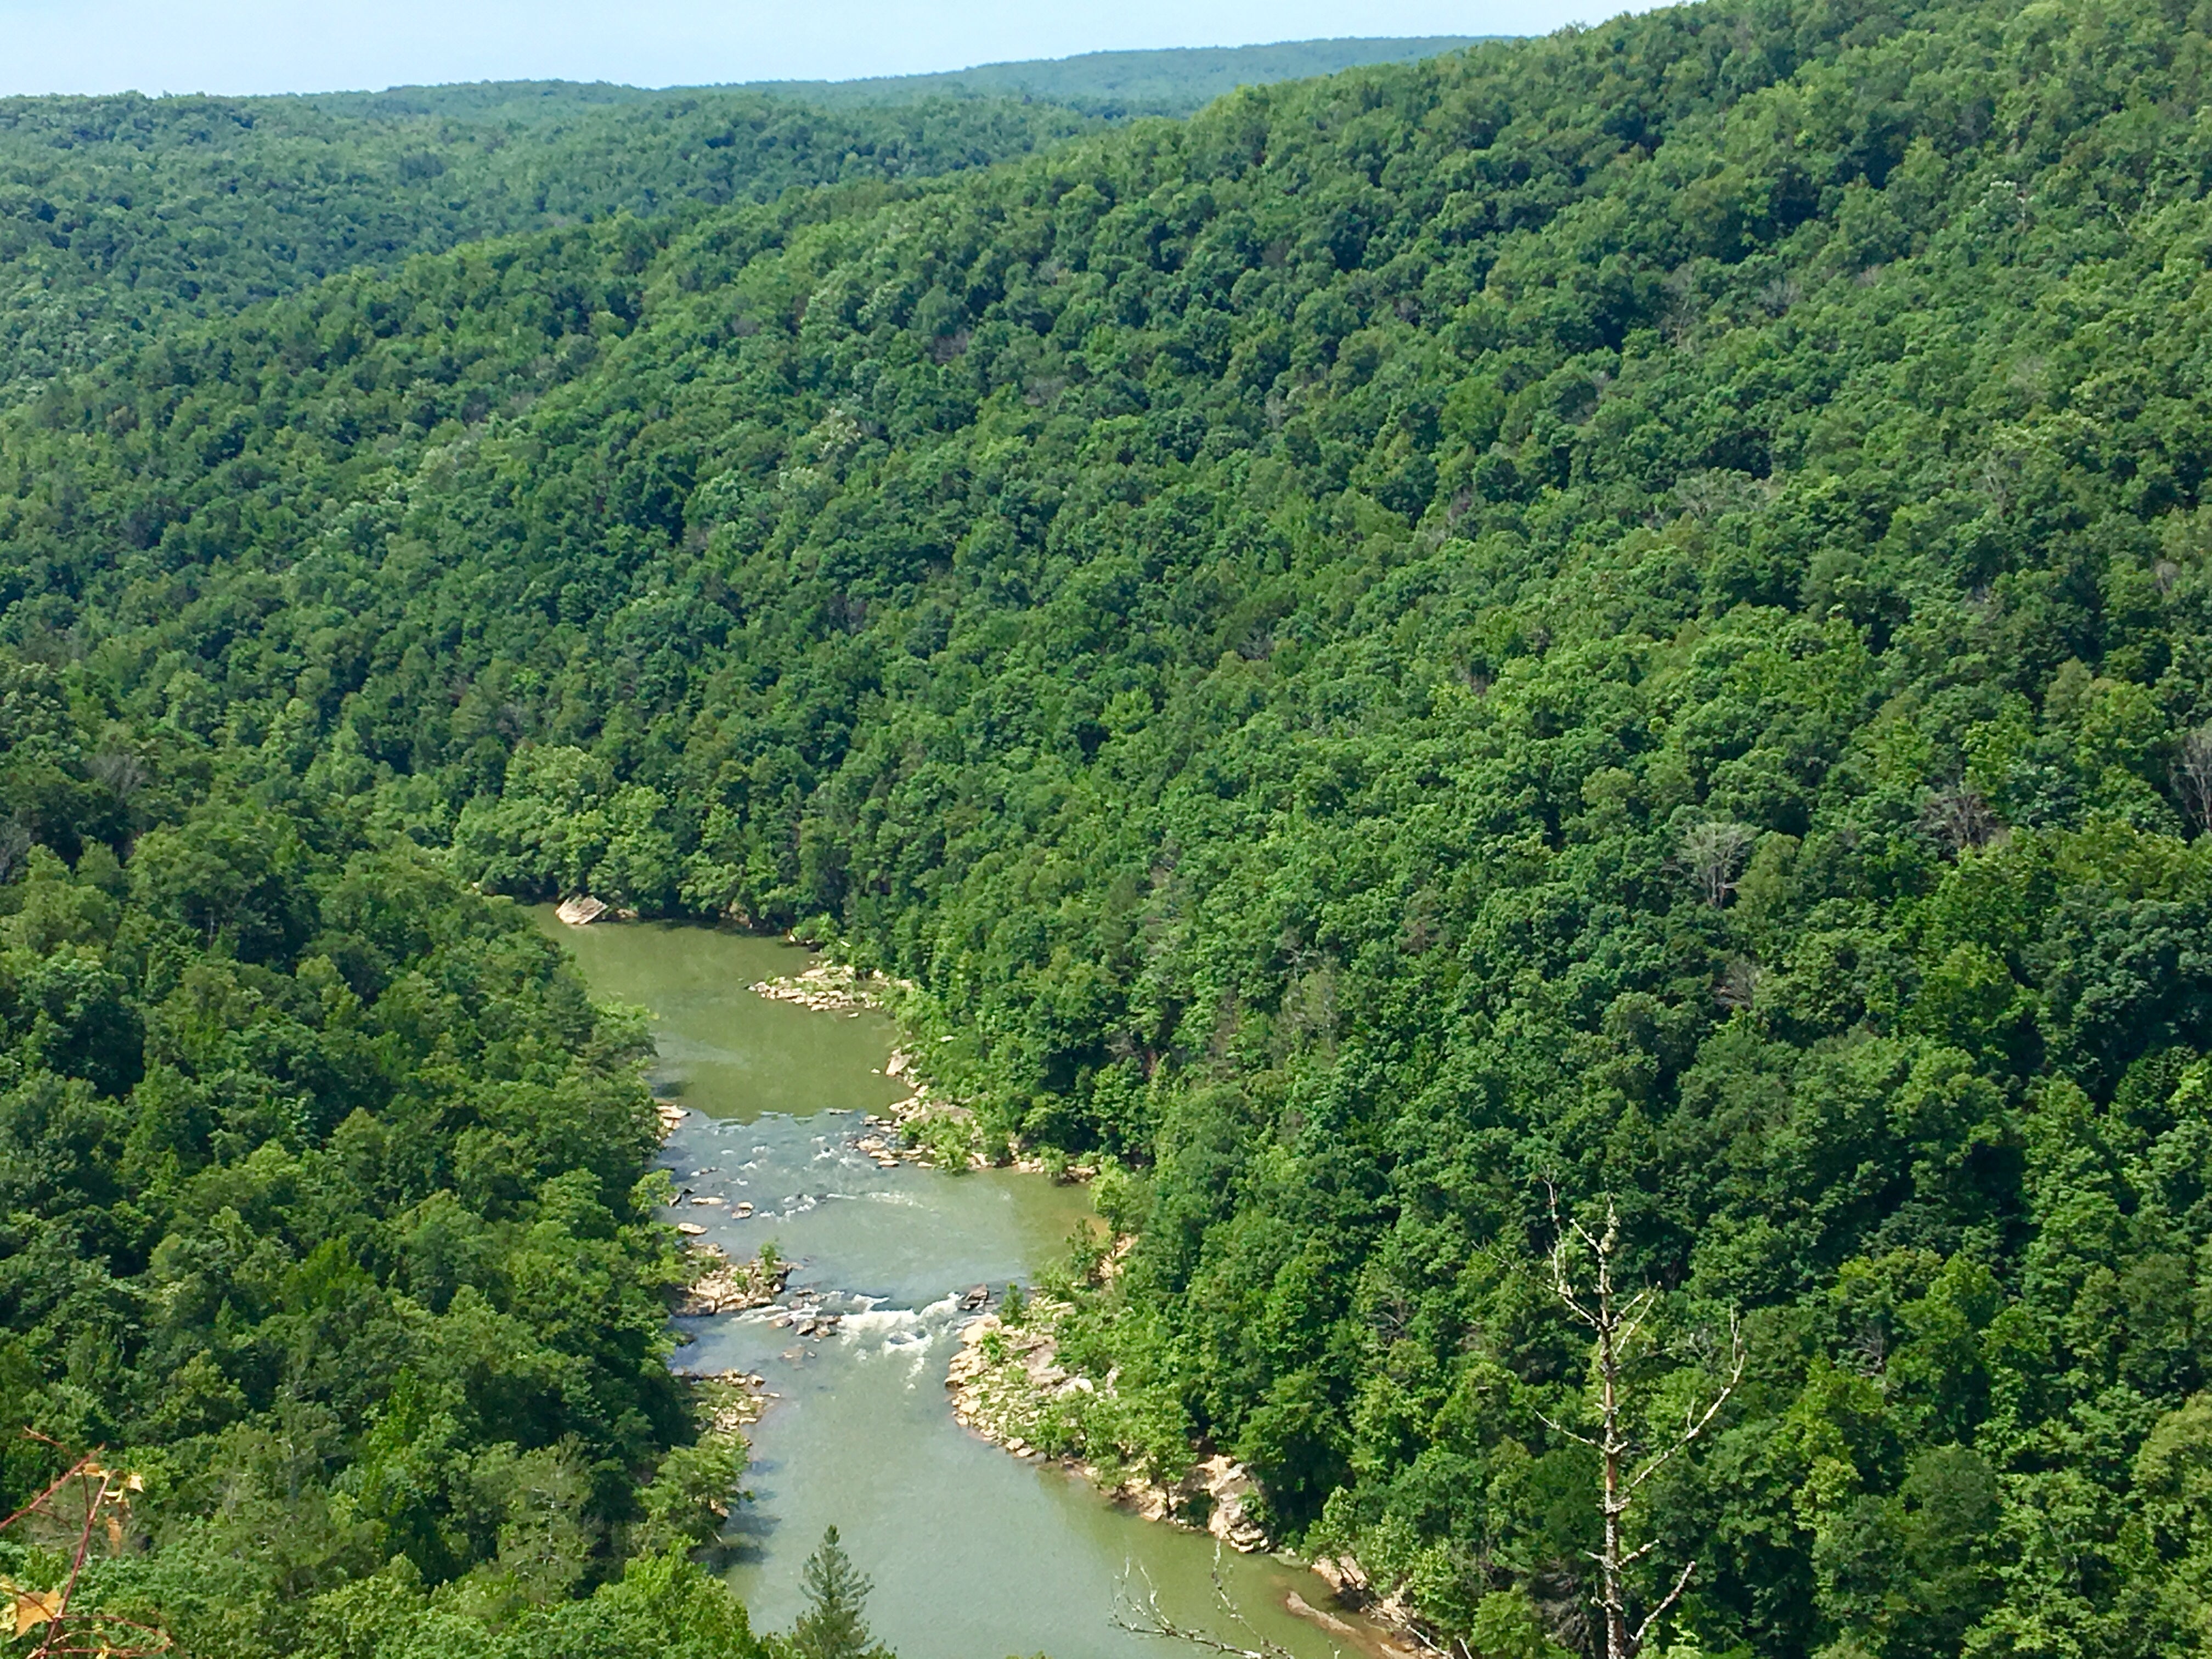 Overlook of the river